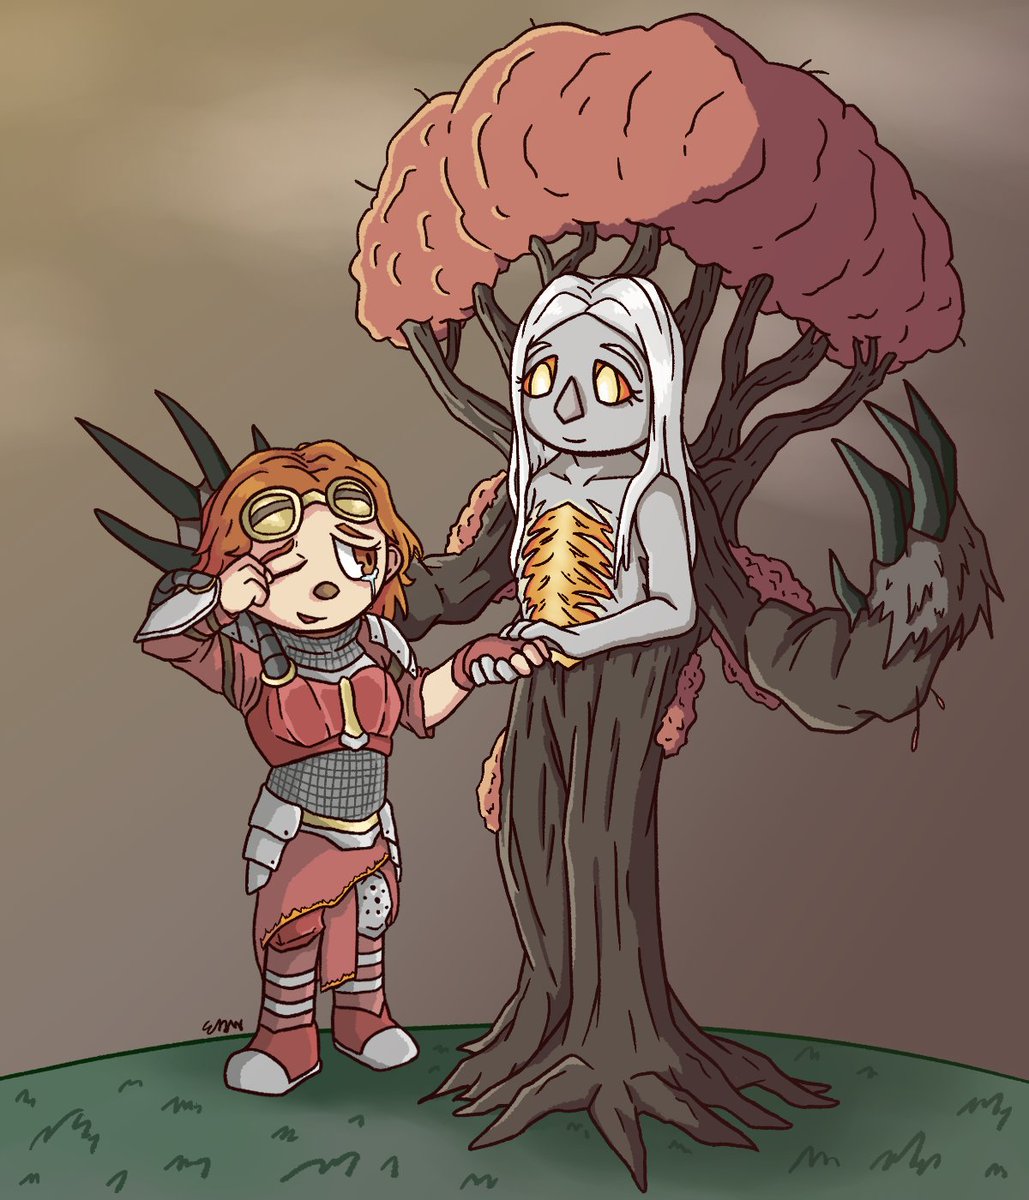 Chandra and Wrenn! I loved the interaction they had at the beginning of the story. I know Wrenn is pretty tall compared to Chandra, but what if... Wrenn was a huggable size....

#MagicTheGathering  #Phyrexia #fanart #MTGPhyrexia  #MTGMOM #MTGMachine